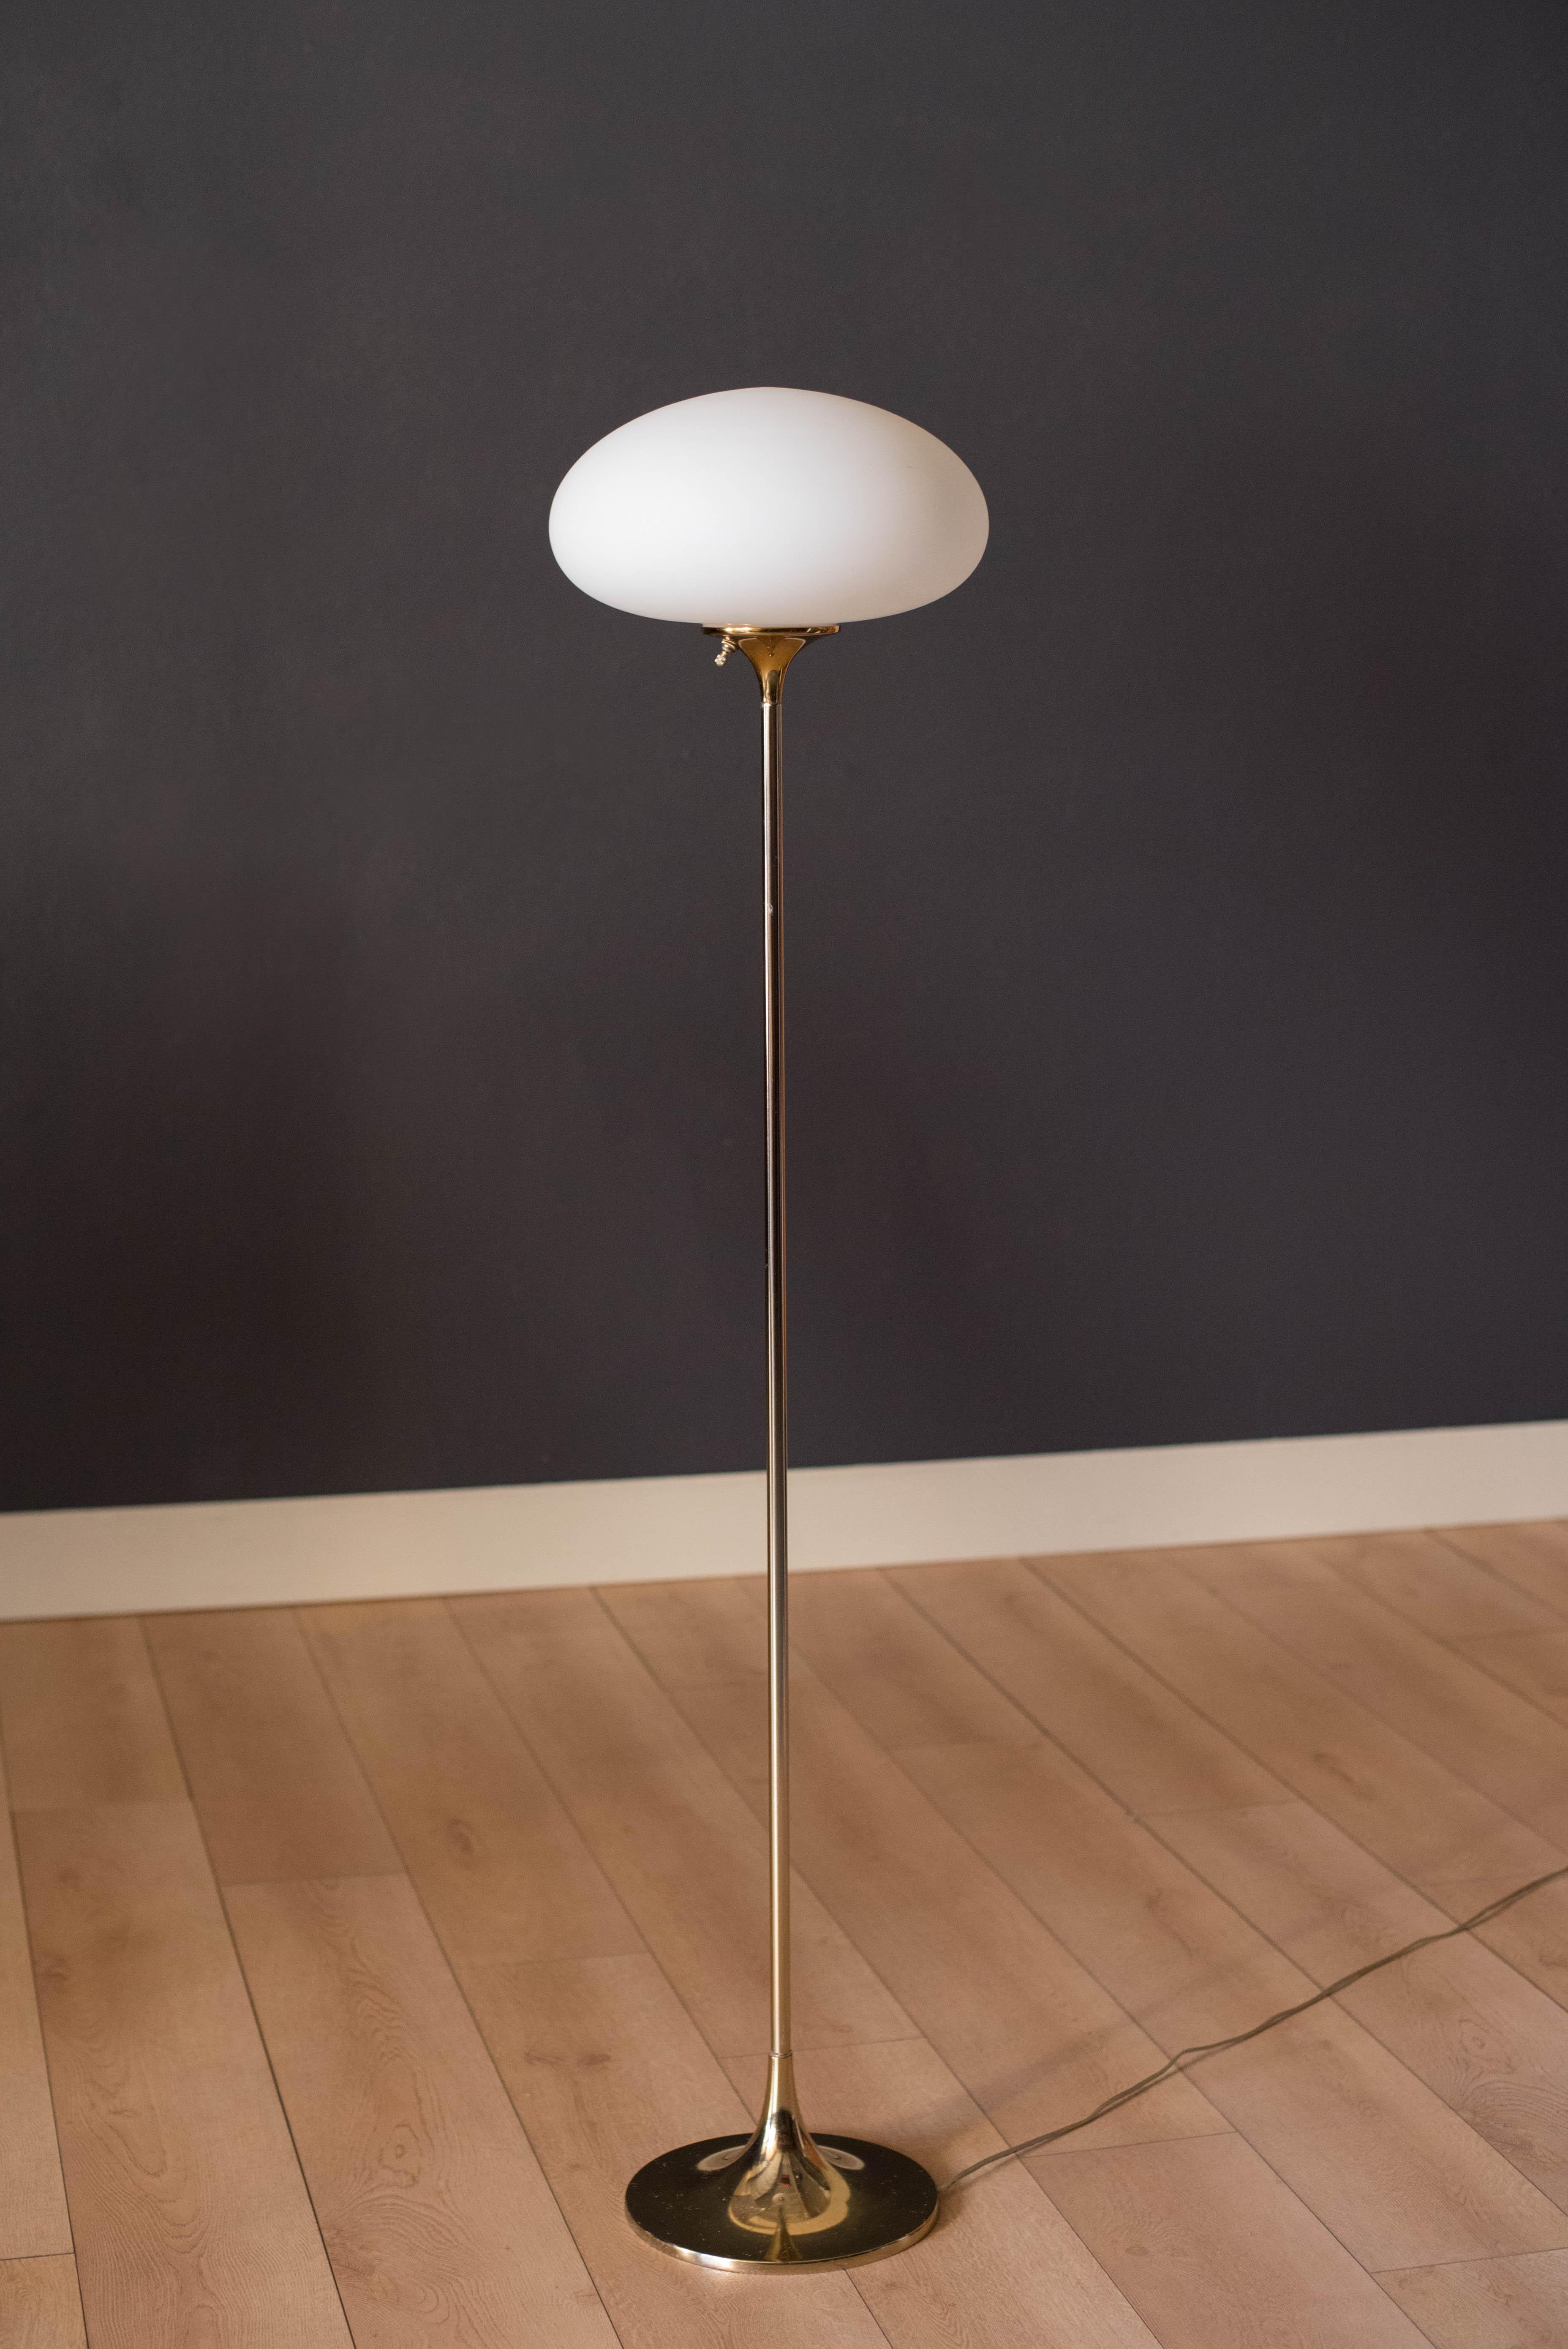 Mid-Century Modern Laurel floor lamp in brass. This piece features a frosted glass mushroom shade and includes a three-way switch.

Measure: Shade 13